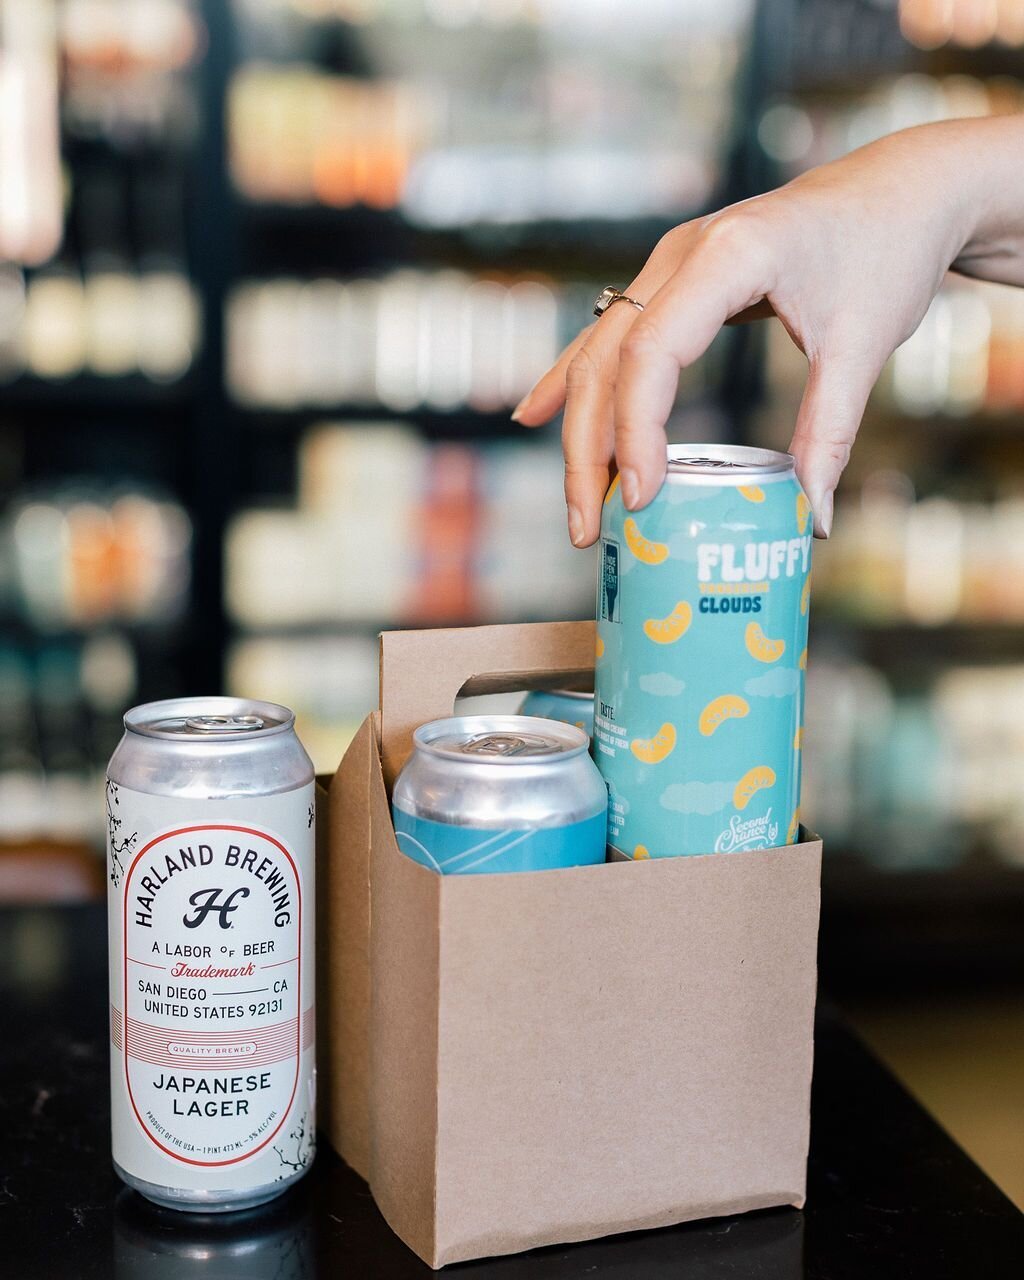 Stock up for the weekend with all the favorites! 🍻

Have you seen our curated selection of local craft beer? Head to the cooler and build a 4-pack of your dreams for just $20!

Available now at both locations. Cheers!

.
.
.

#mrktspace_us #market #